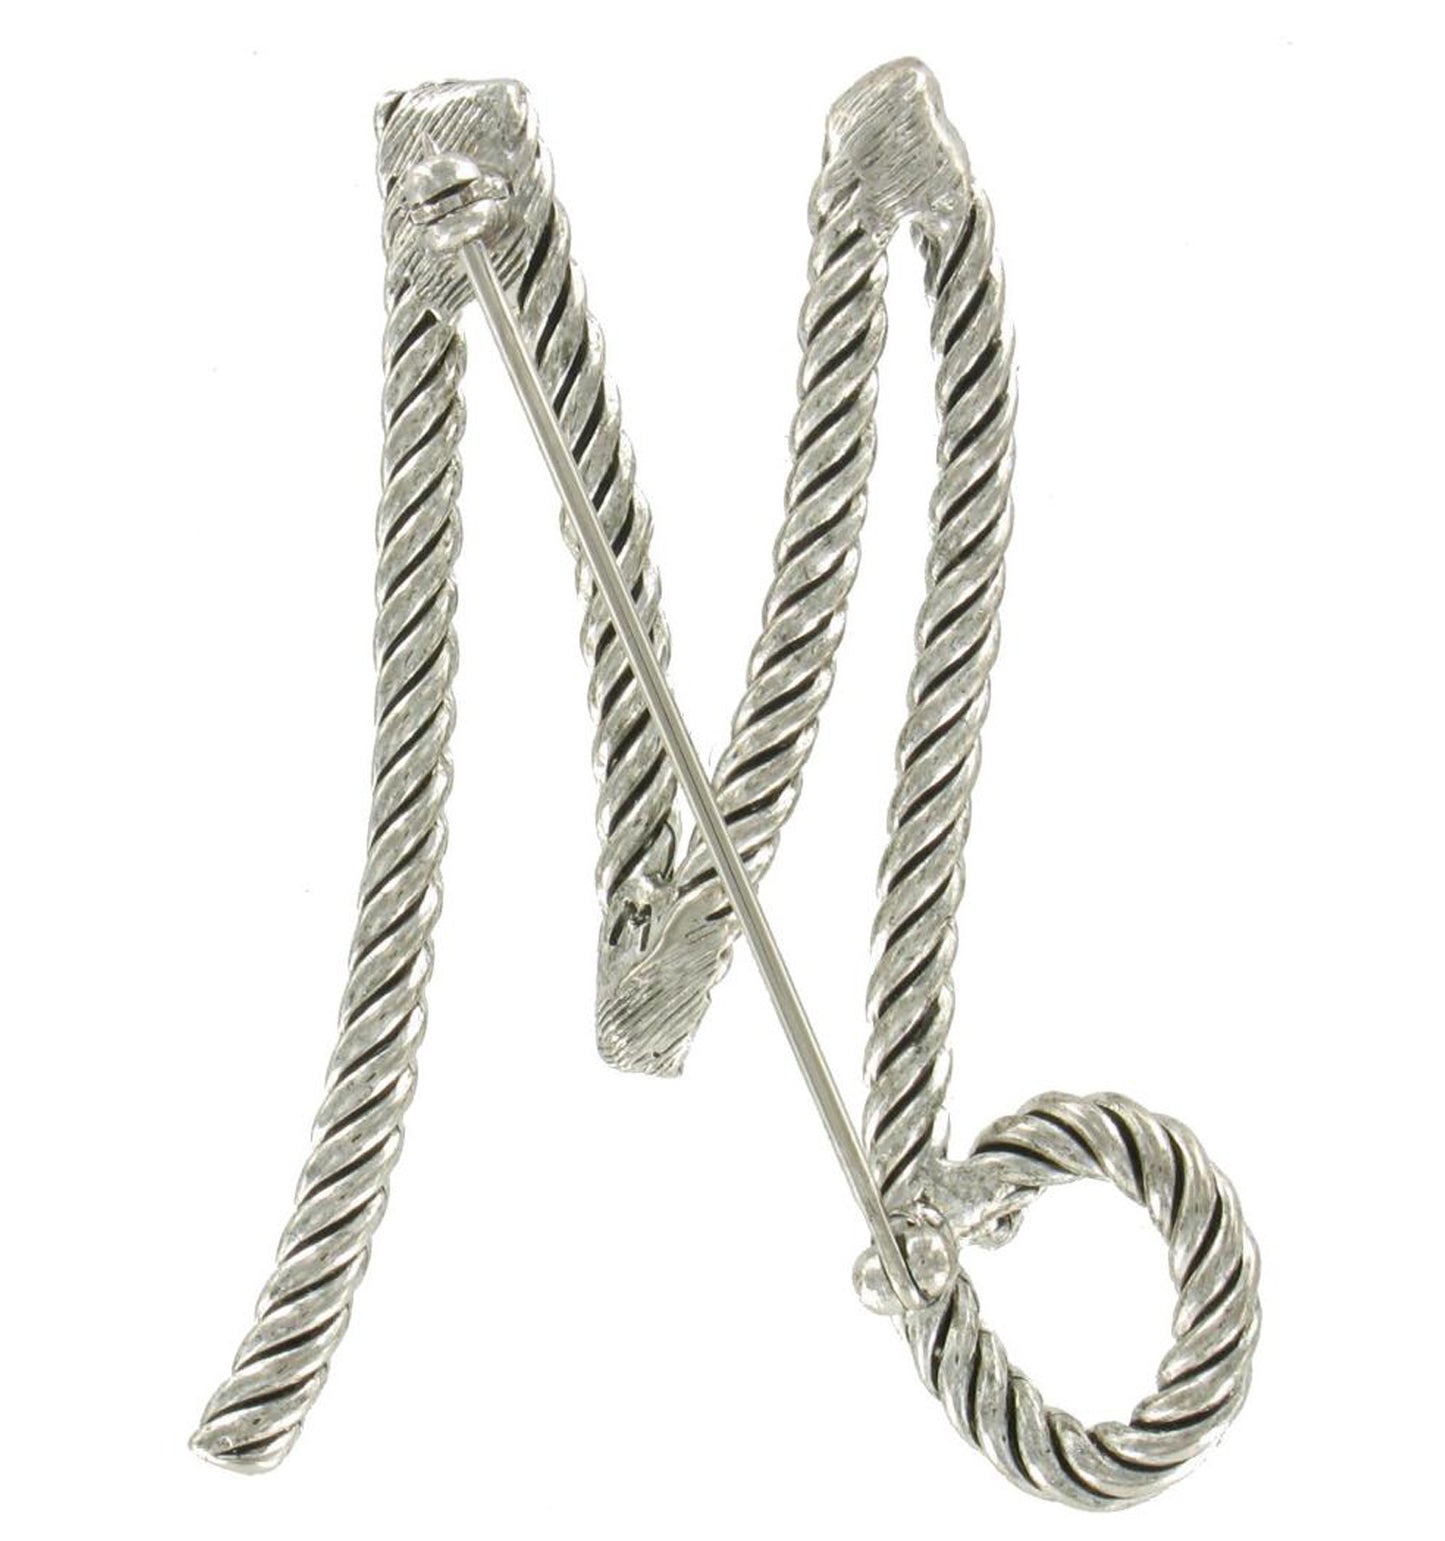 Large Big Script Silver Tone Rope Initial Letter "M" Pin Brooch 2 1/2"